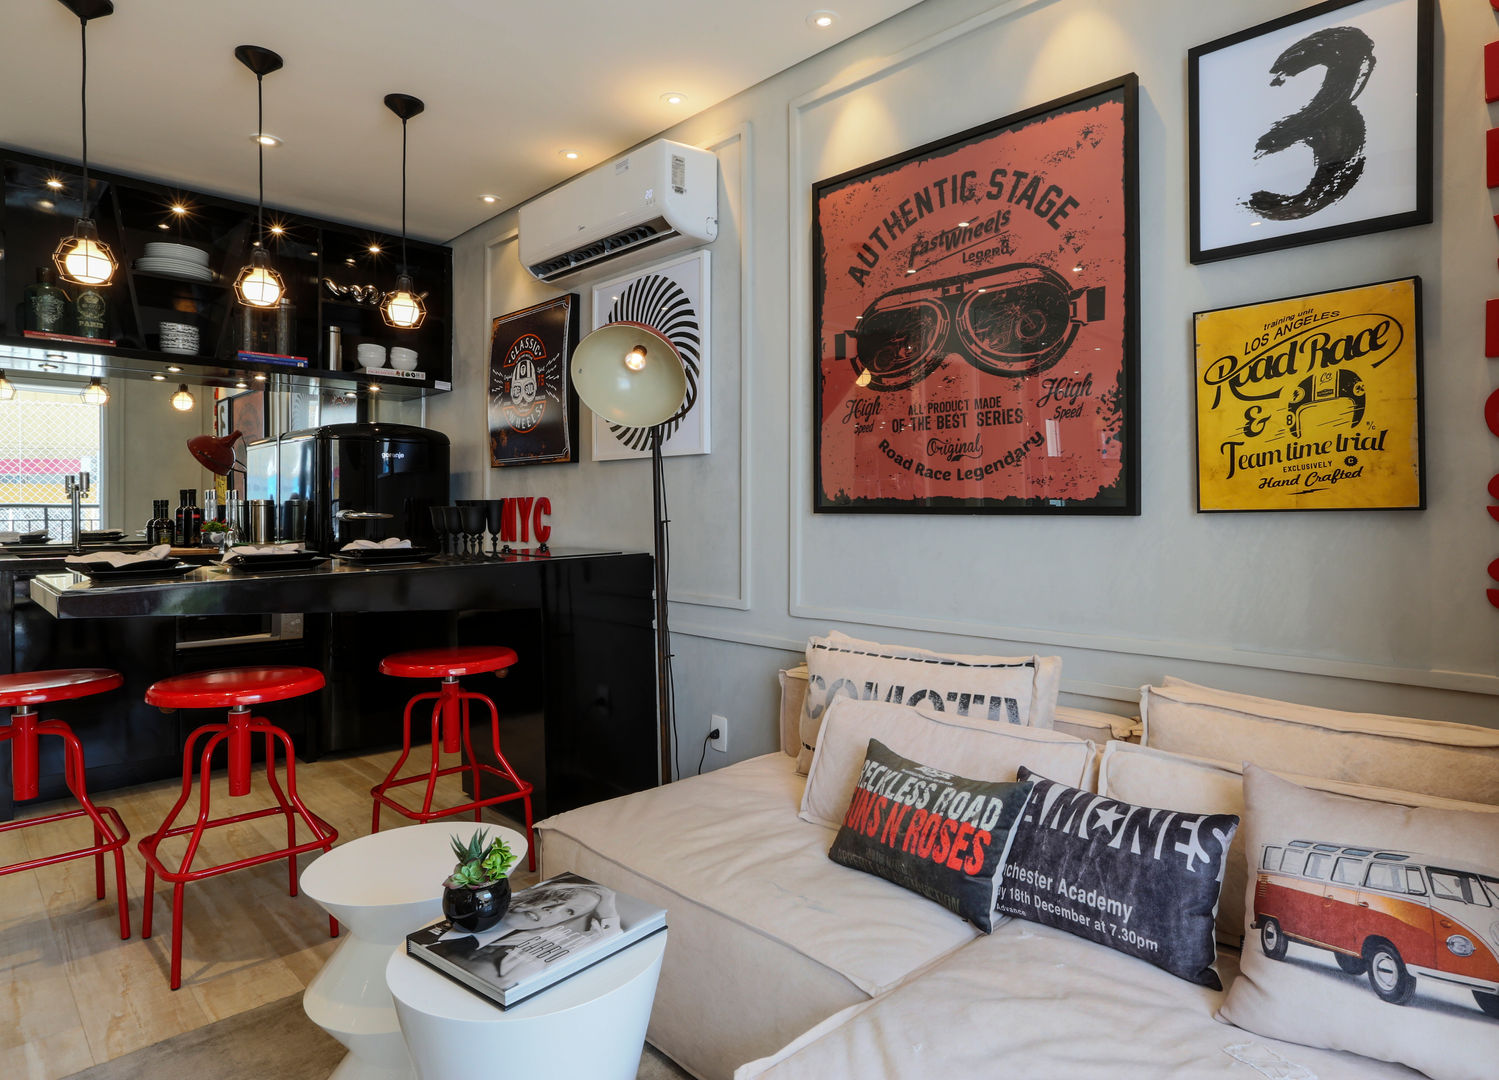 homify Moderne woonkamers